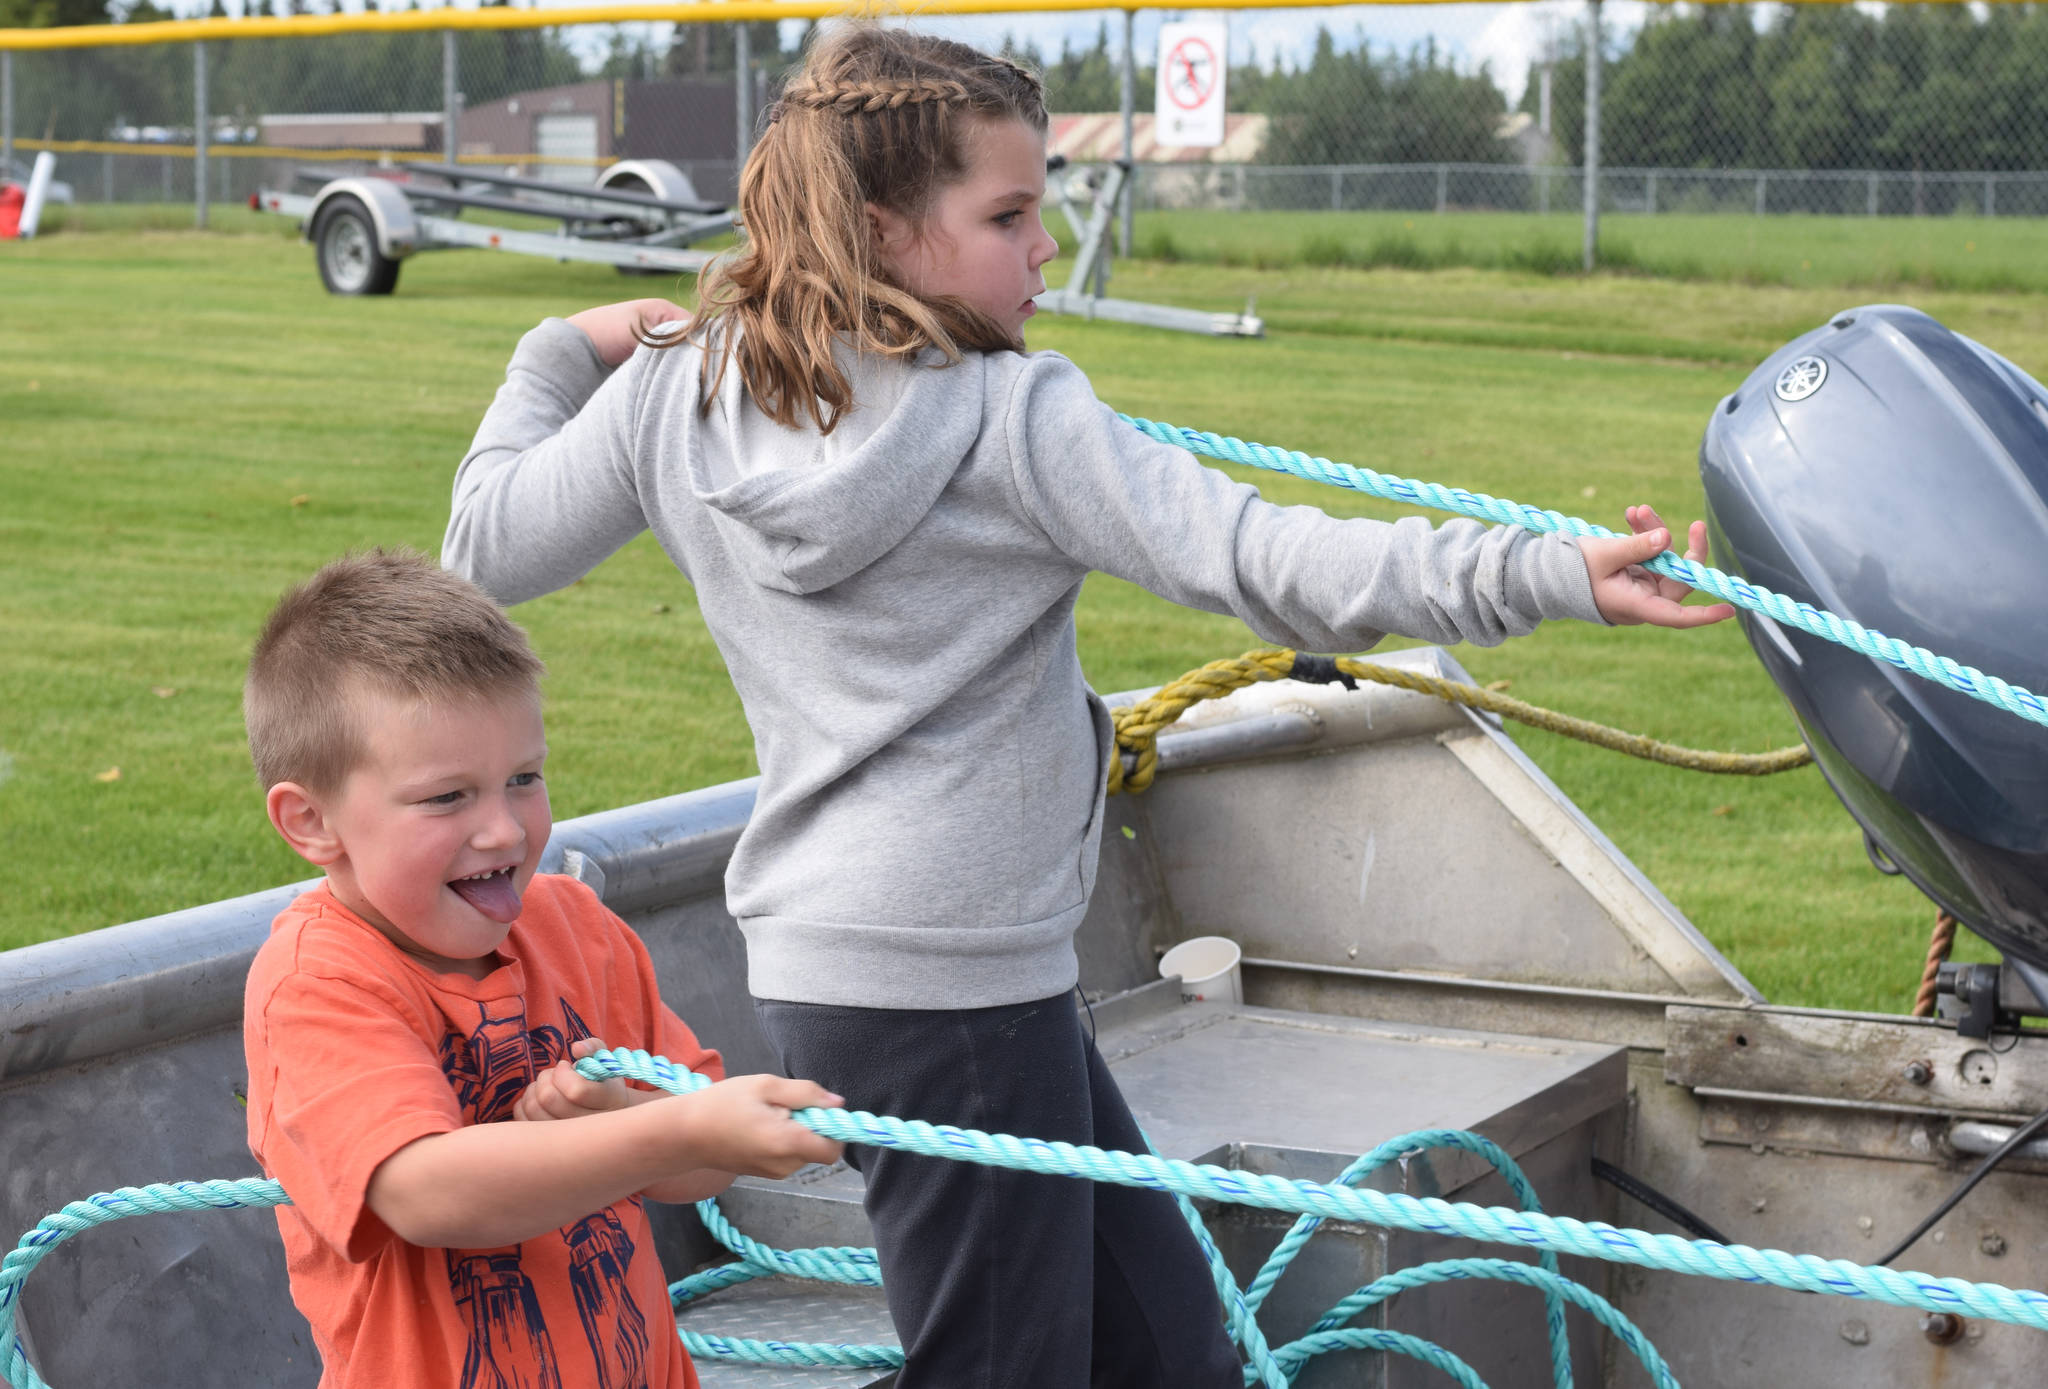 Cody Schaefer, left, and Shayla Smith compete against each other in a net pull at Industry Appreciation Day on Saturday, Aug. 26, 2017 in Kenai, Alaska. (Photo by Kat Sorensen/Peninsula Clarion)